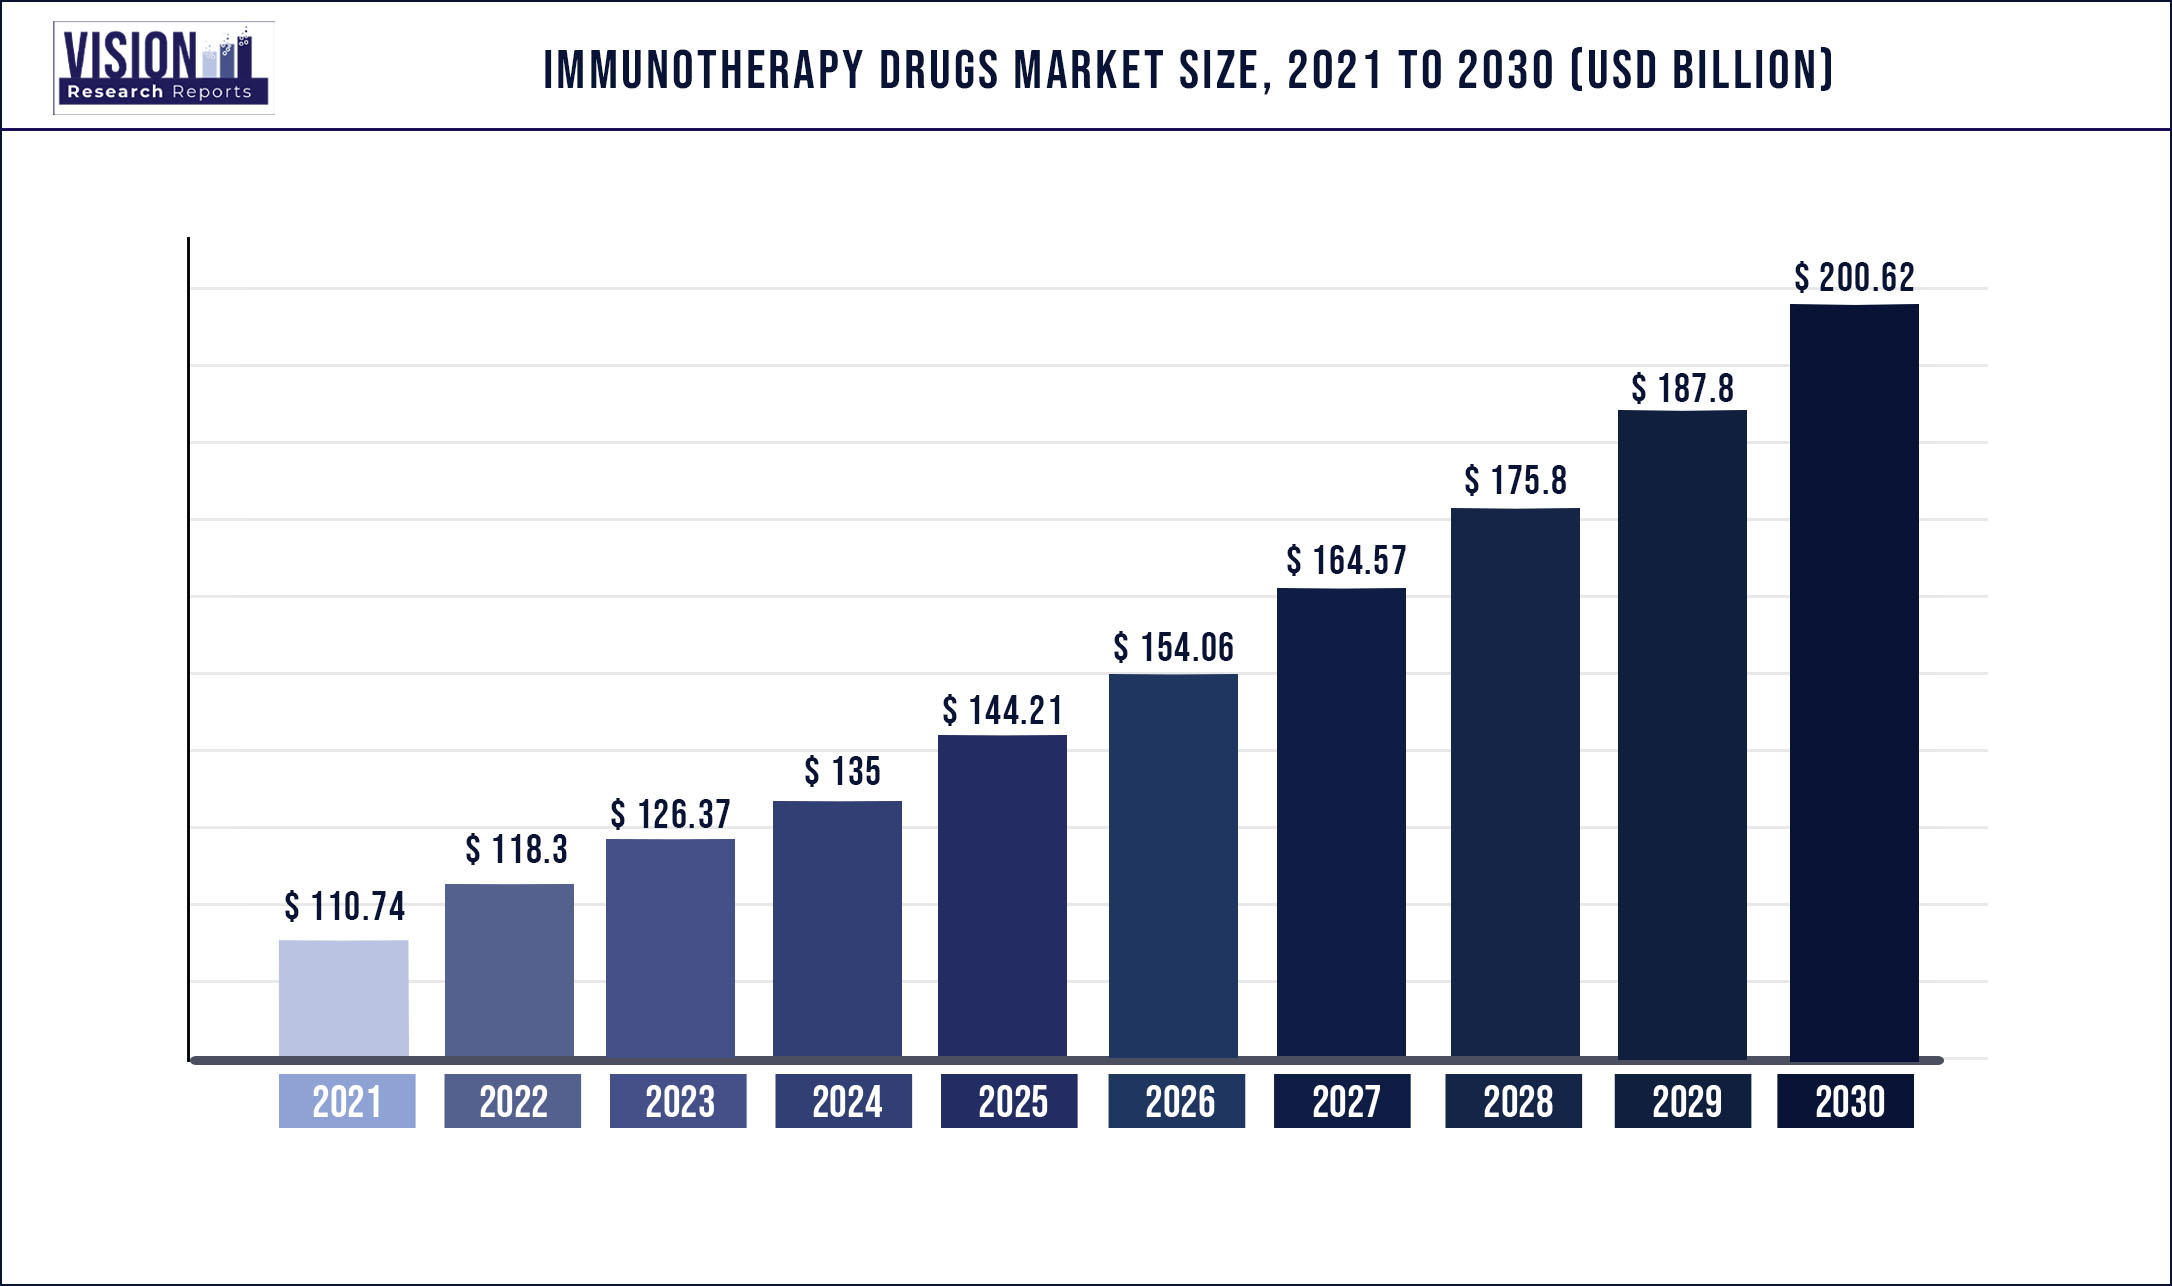 Immunotherapy Drugs Market Size 2021 to 2030